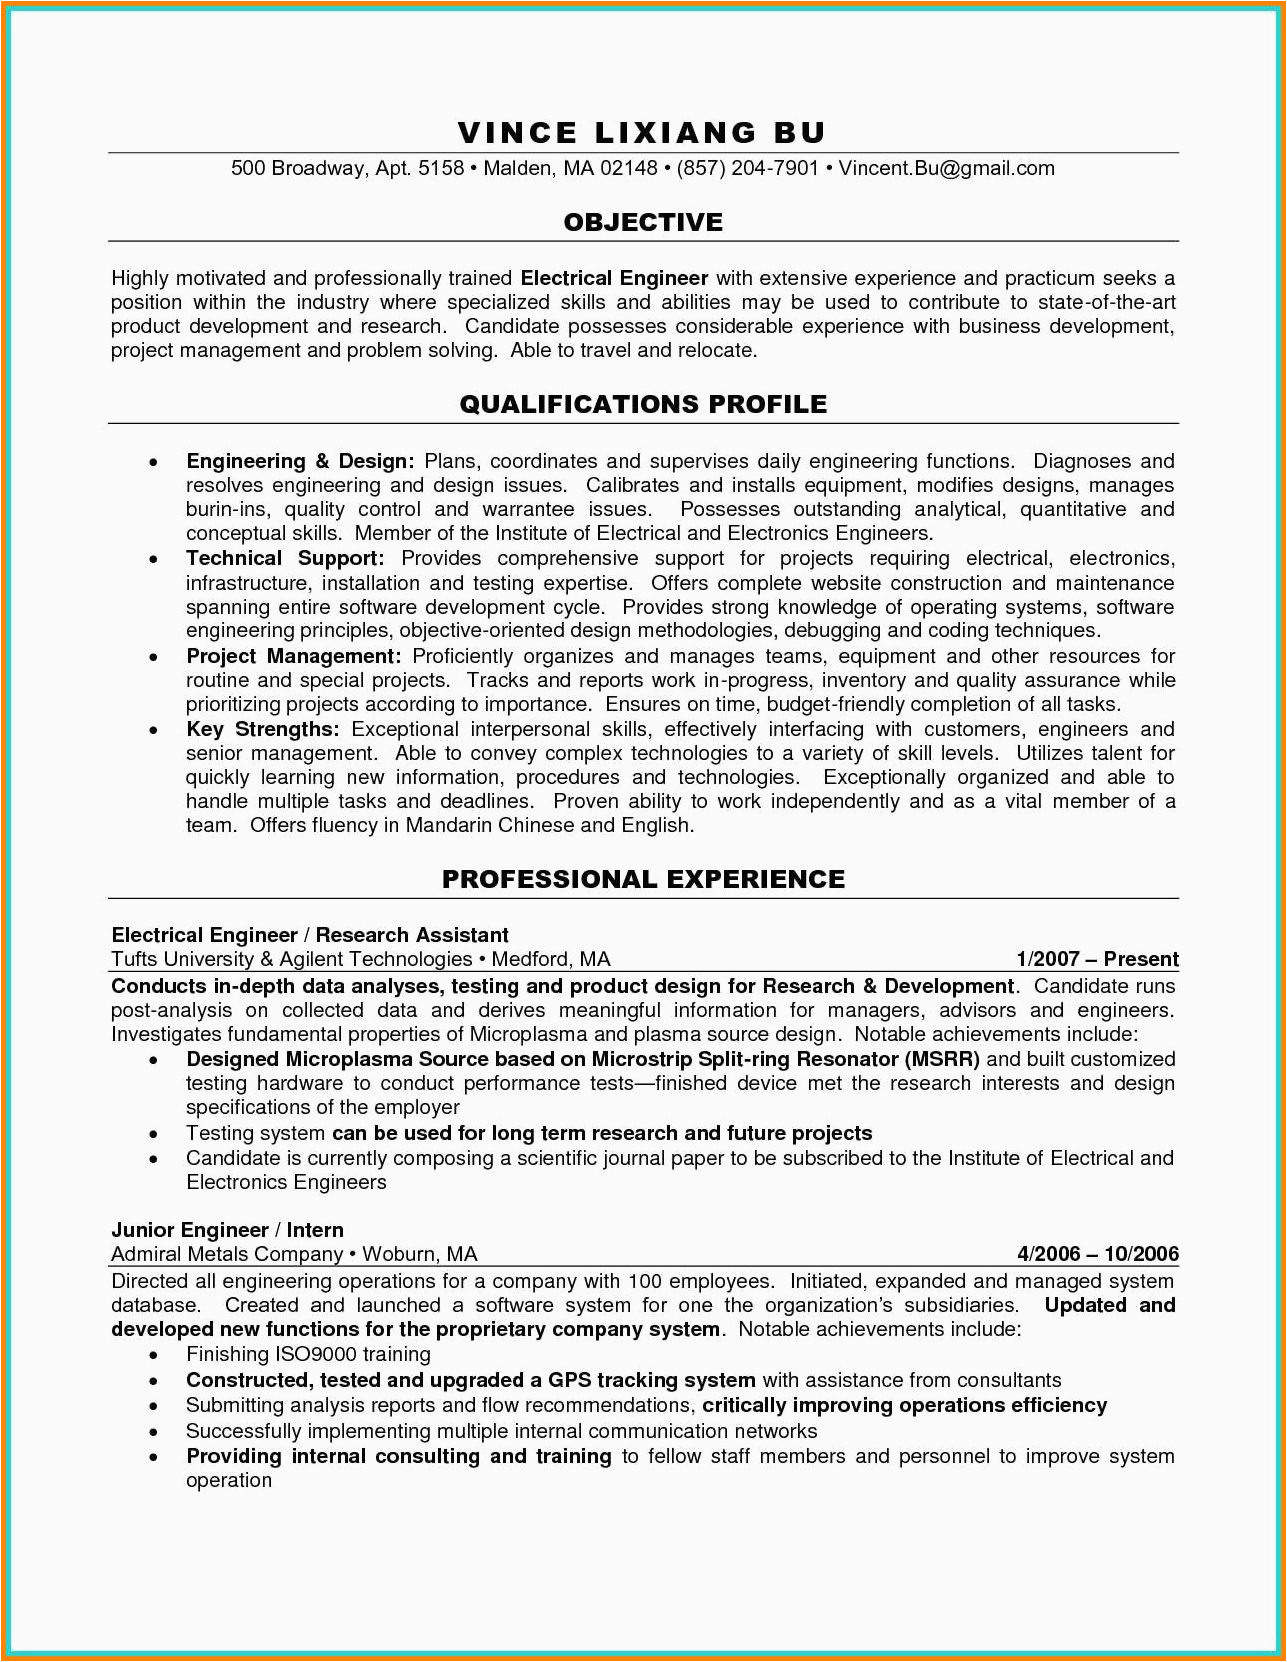 Sample Engineering Student Resume for Internship Electrical Engineer Resume Sample New 9 Engineering